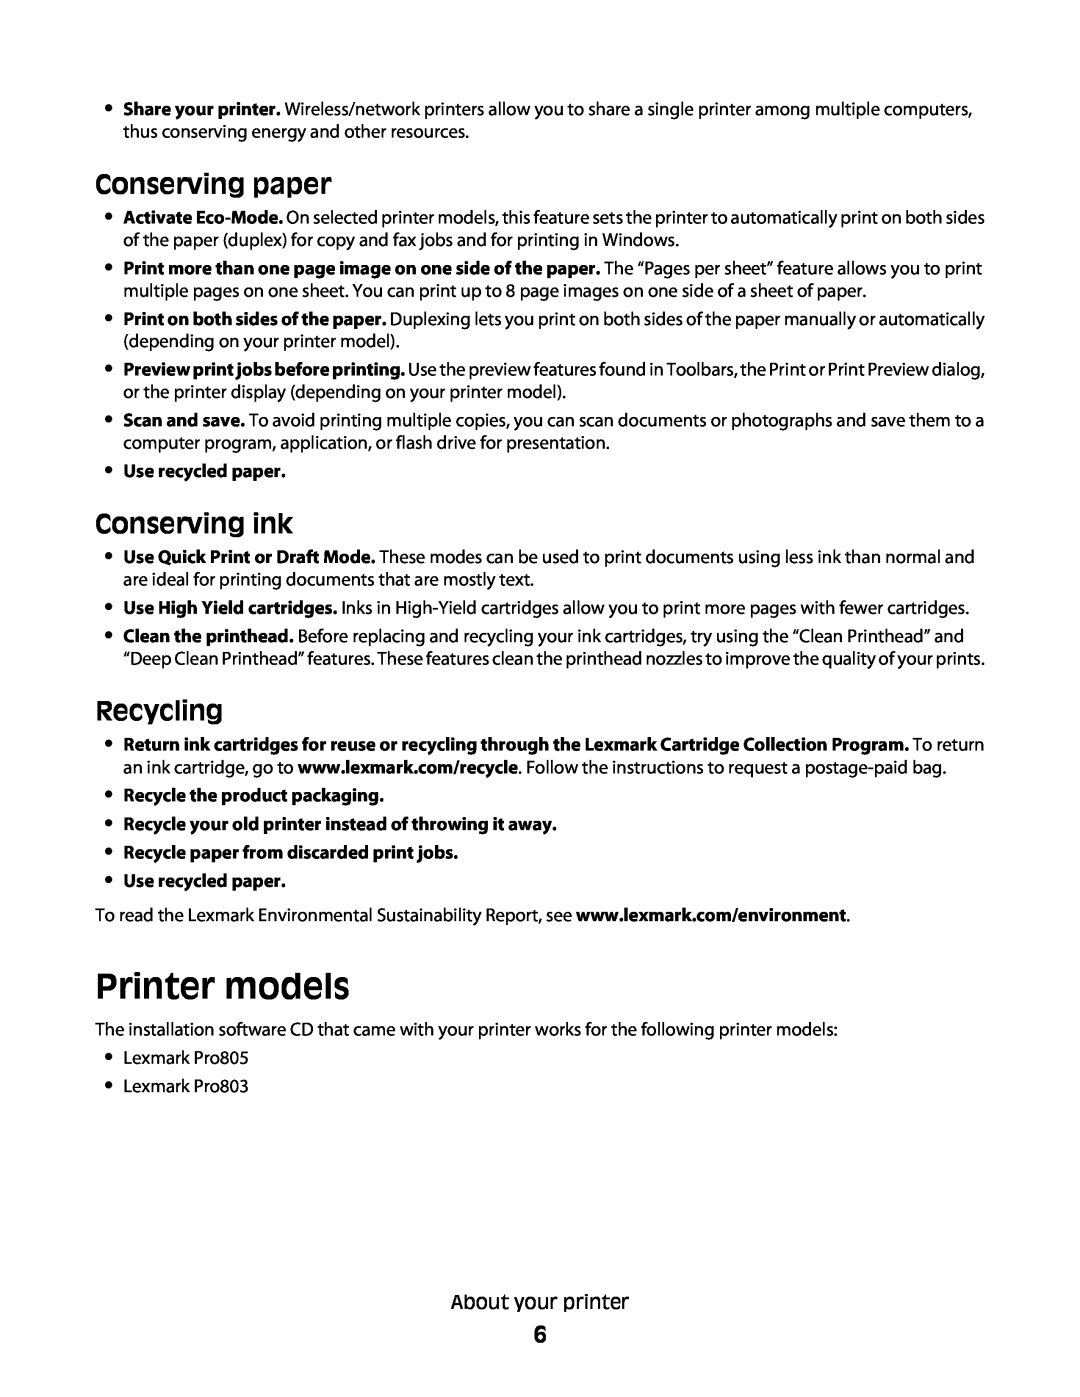 Lexmark Pro803, Pro800 manual Printer models, Conserving paper, Conserving ink, Recycling, Use recycled paper 